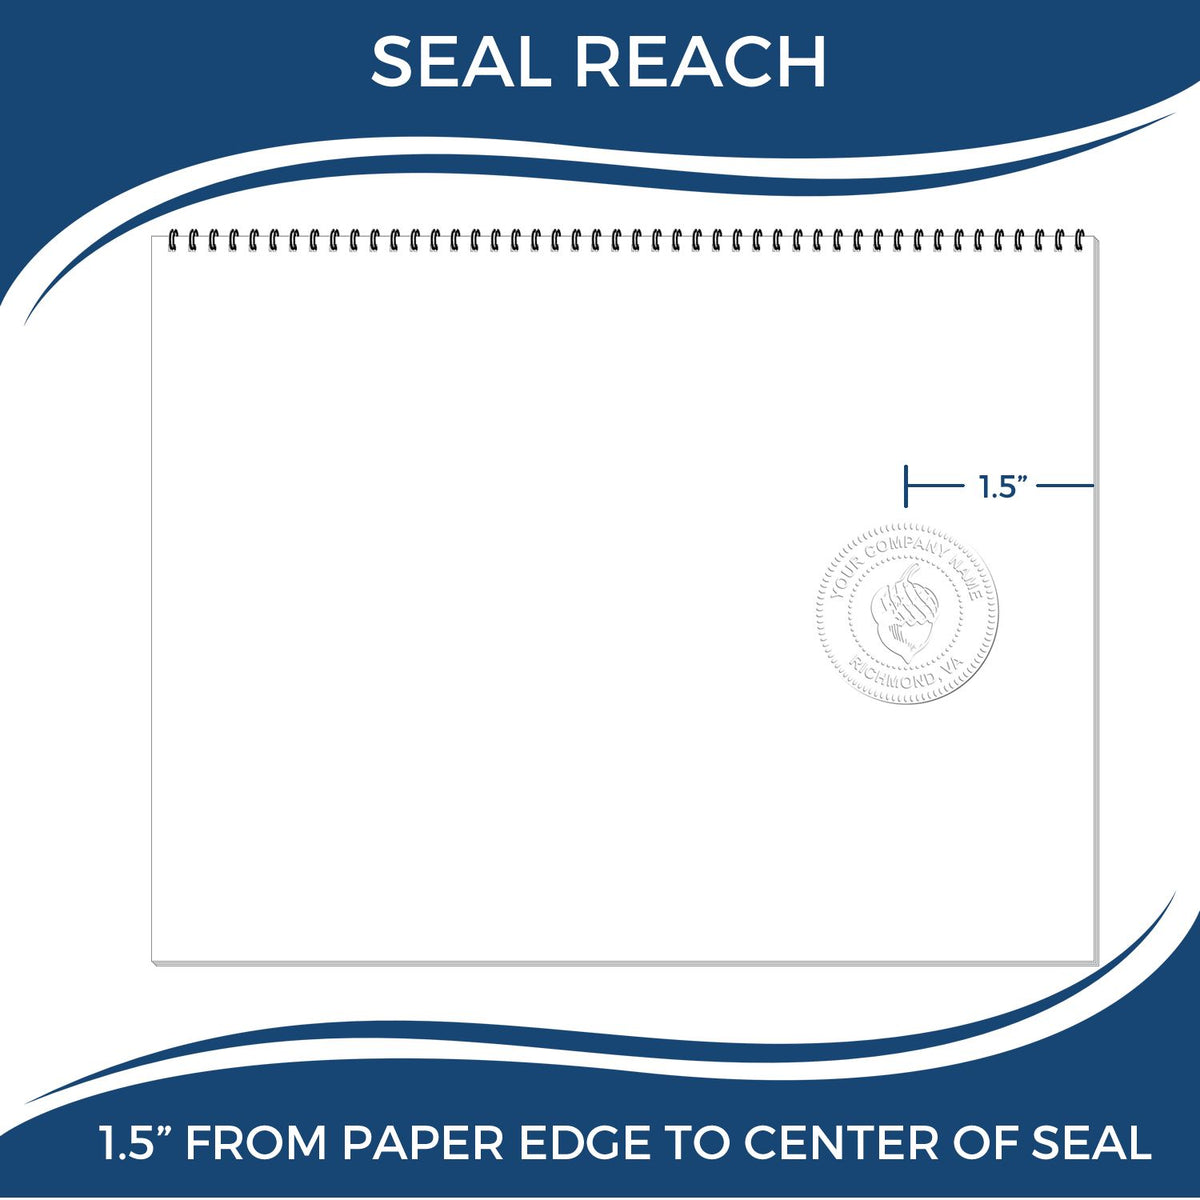 An infographic showing the seal reach which is represented by a ruler and a miniature seal image of the Hybrid Georgia Land Surveyor Seal